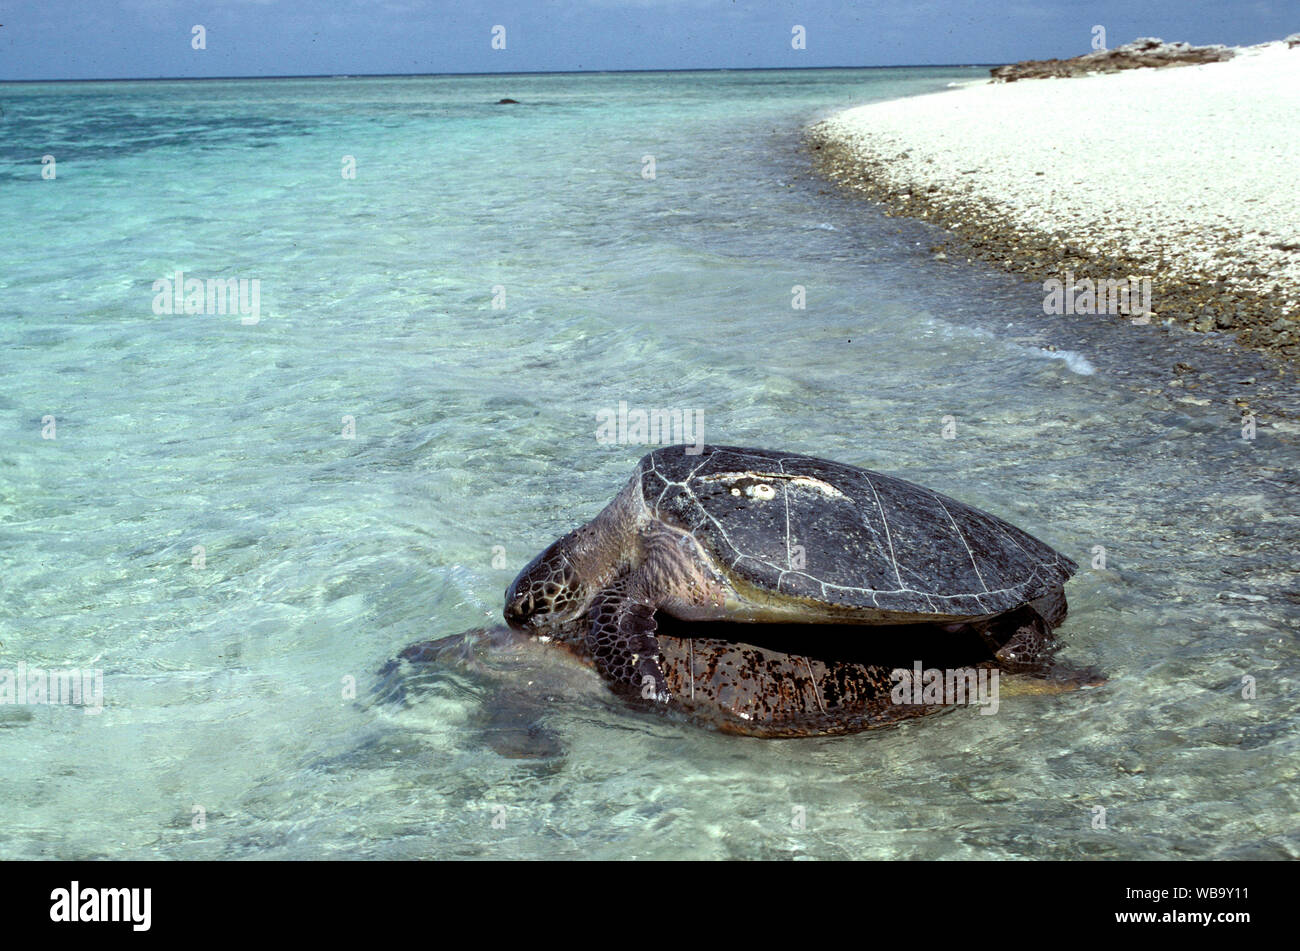 Les tortues vertes (Chelonia mydas), l'accouplement. Lady Musgrave Island, Capricornia Cays National Park, Groupe Capricorn-Bunker, Great Barrier Reef, Queensland, Banque D'Images